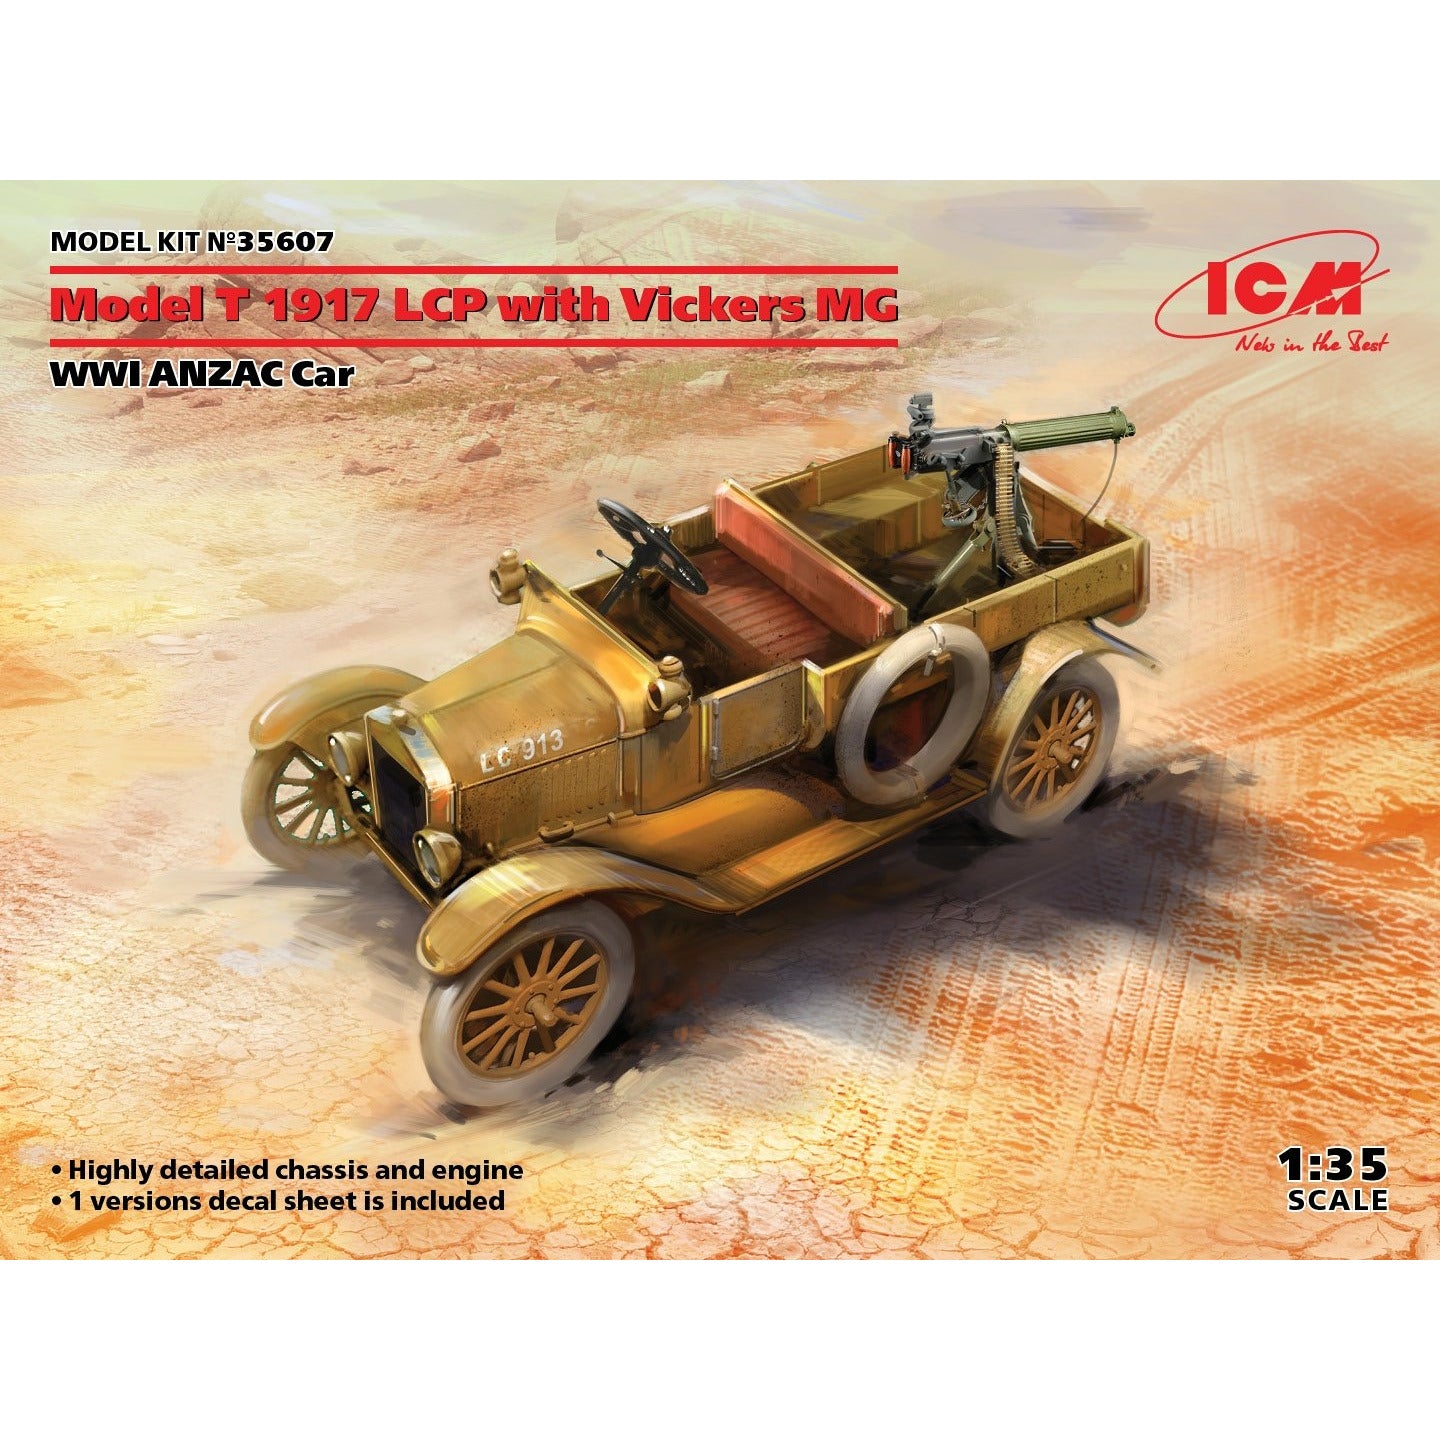 Model T 1917 LCP with Vickers MG - WWI ANZAC Car 1/35 #35607 by ICM